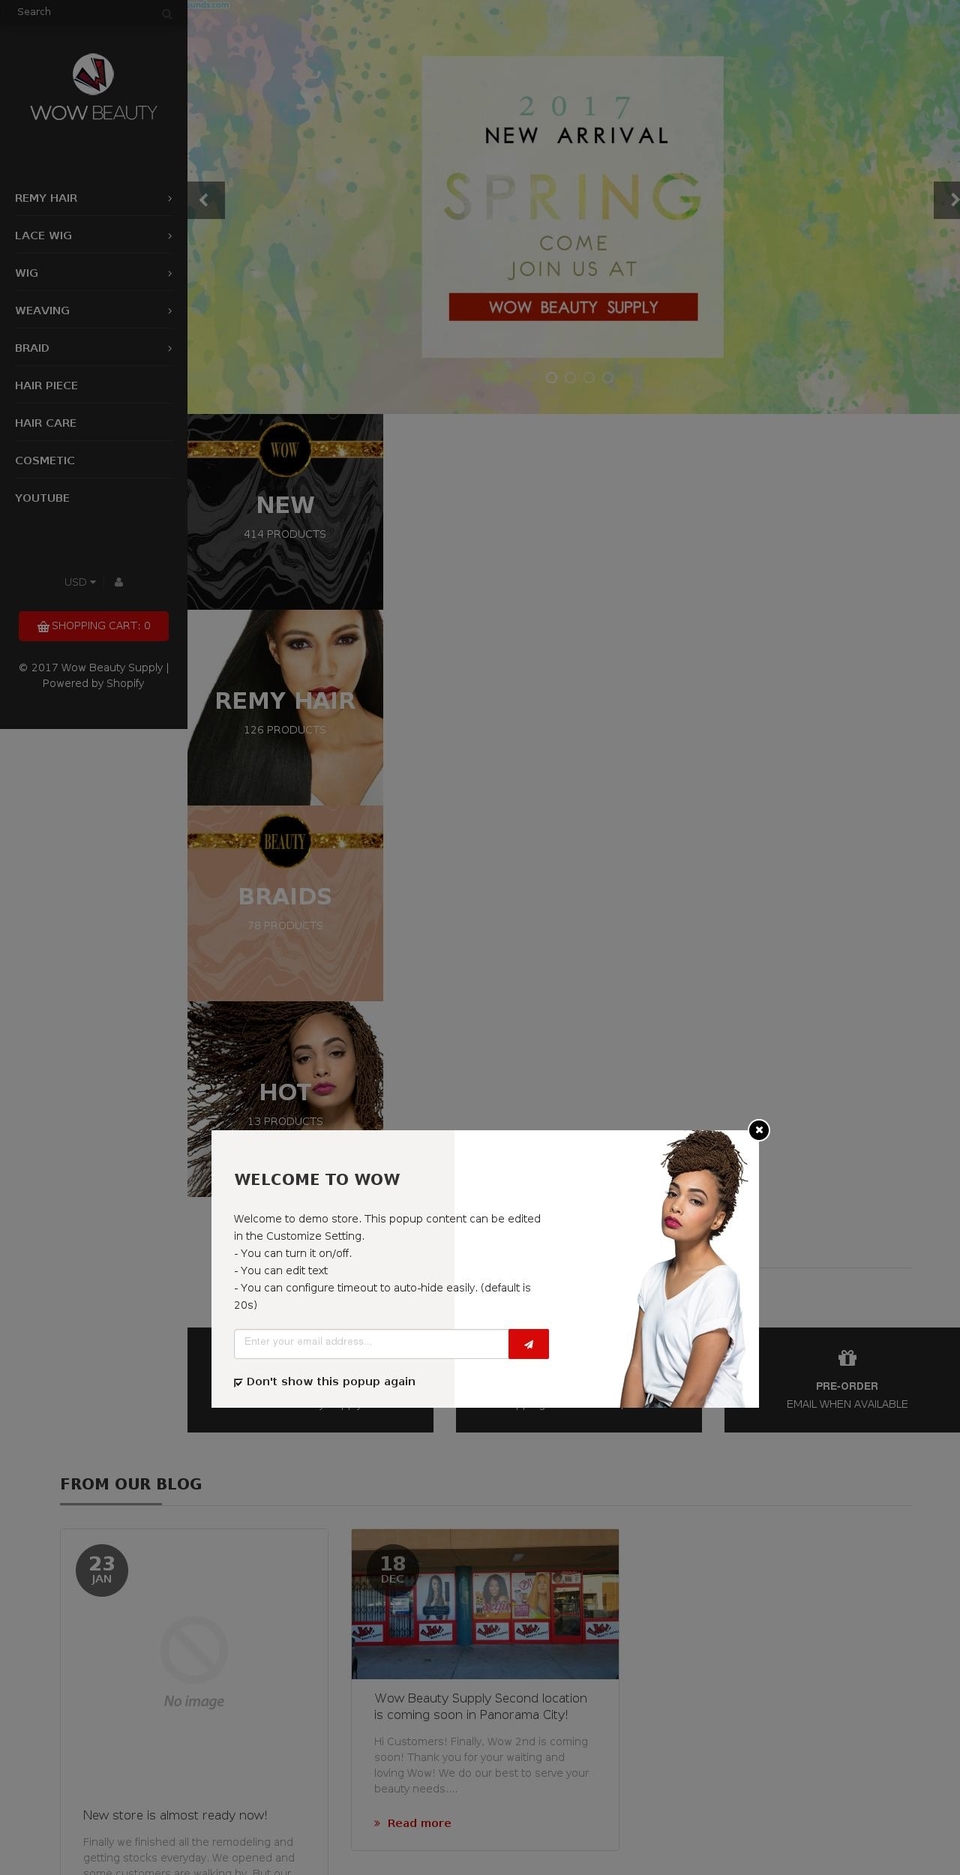 Fashion Shopify theme site example wowbeautysupply.com